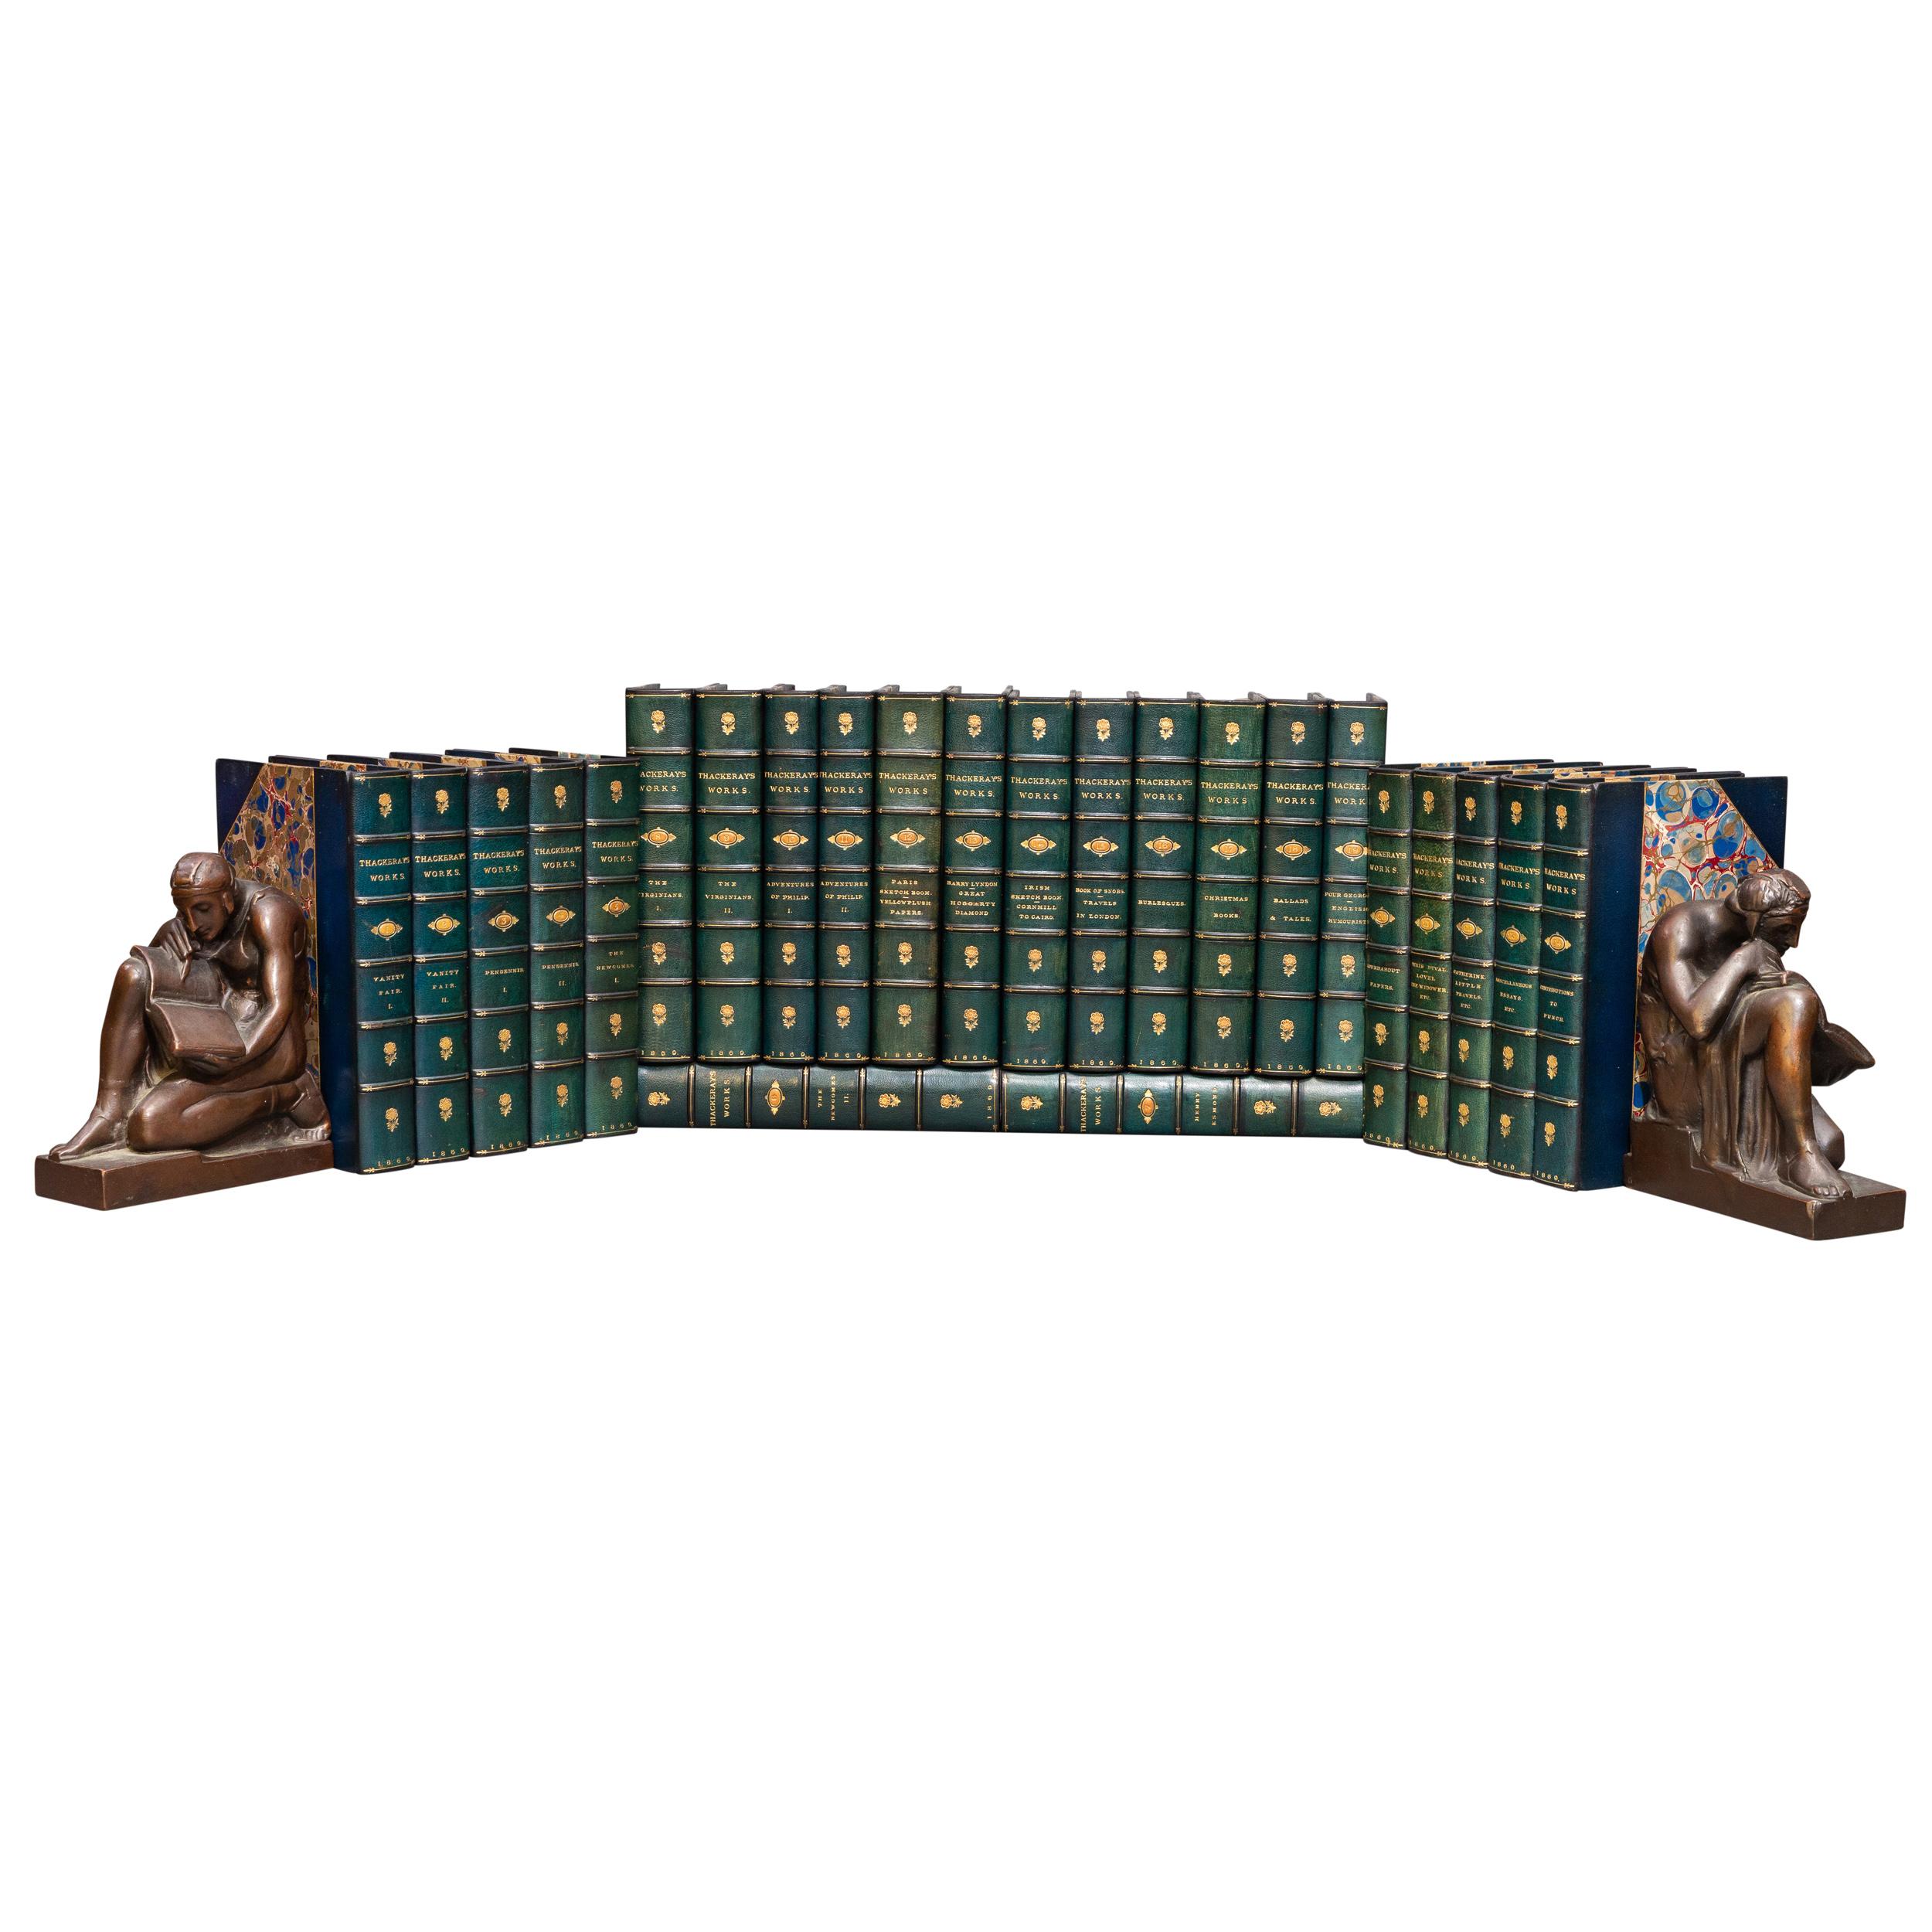 24 volumes. William Makepeace Thackeray, The Works of William Makepeace Thackeray. Bound in 3/4 blue morocco. Marbled boards. Top edges gilt. Raised bands. Decorative floral symbols on spine. Marbled endpapers. Illustrated. Published: London; Smith,